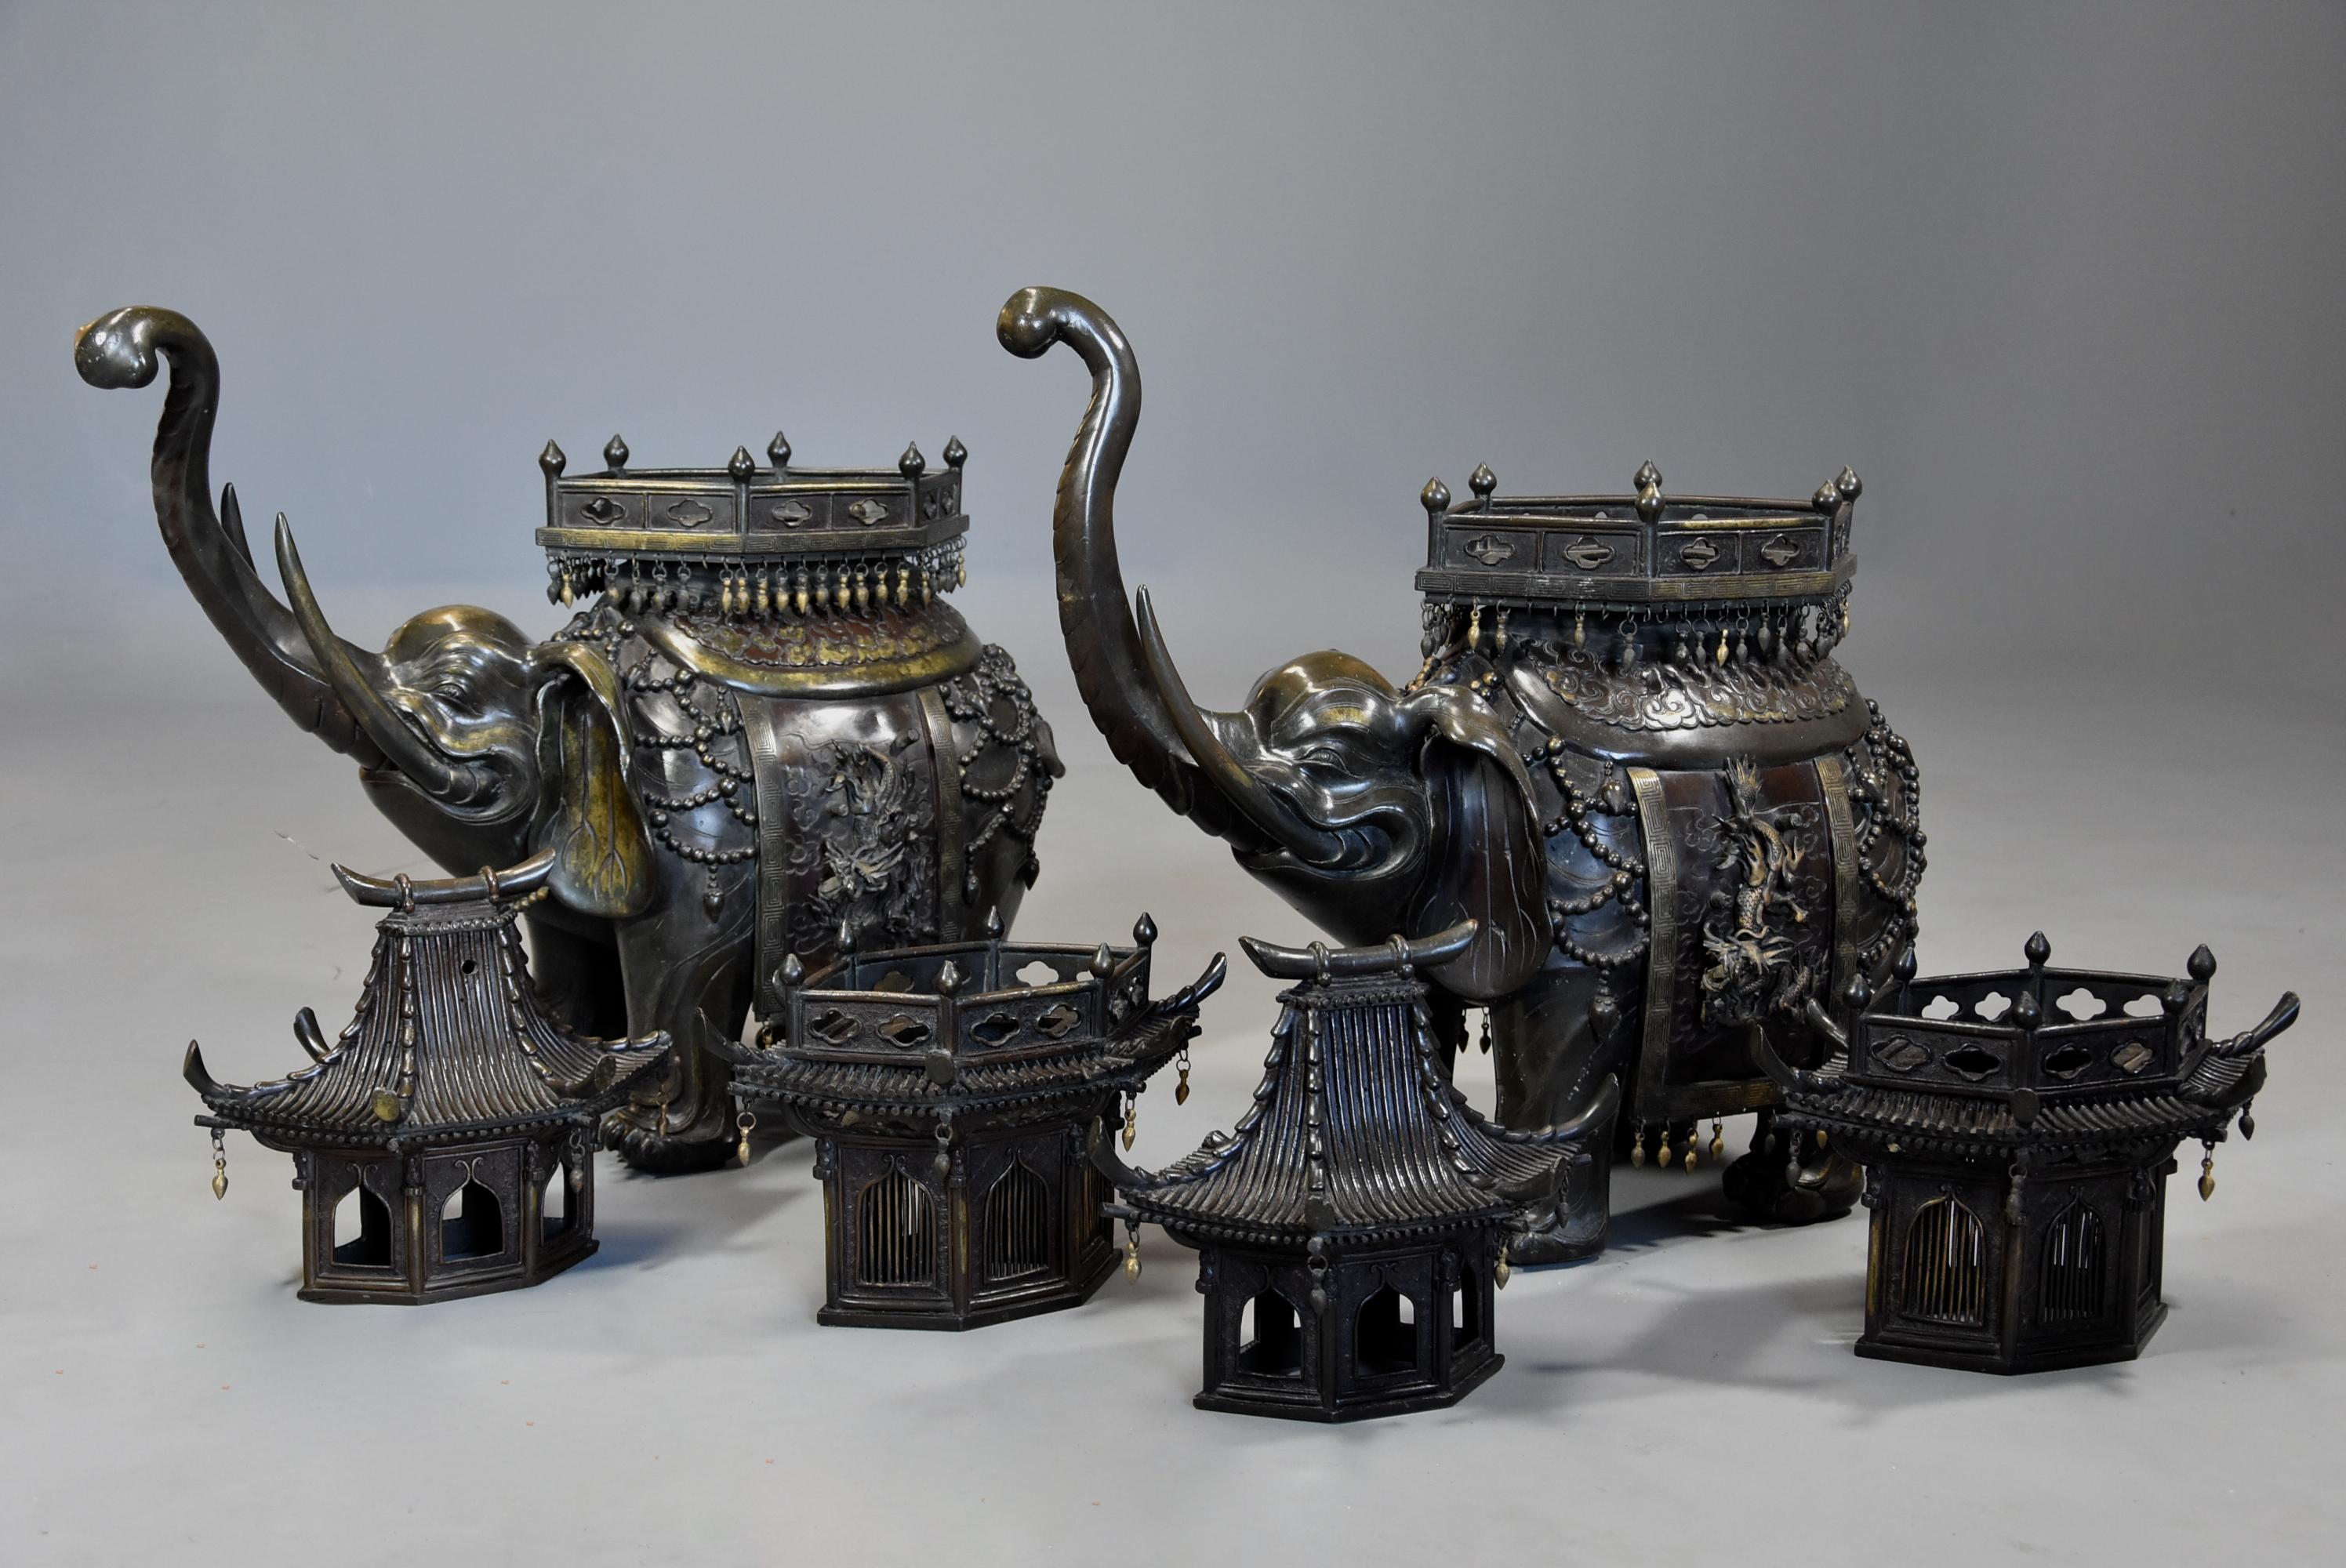 Pair of Large 19th Century Japanese Meiji Bronze Elephant Incense Burners For Sale 9